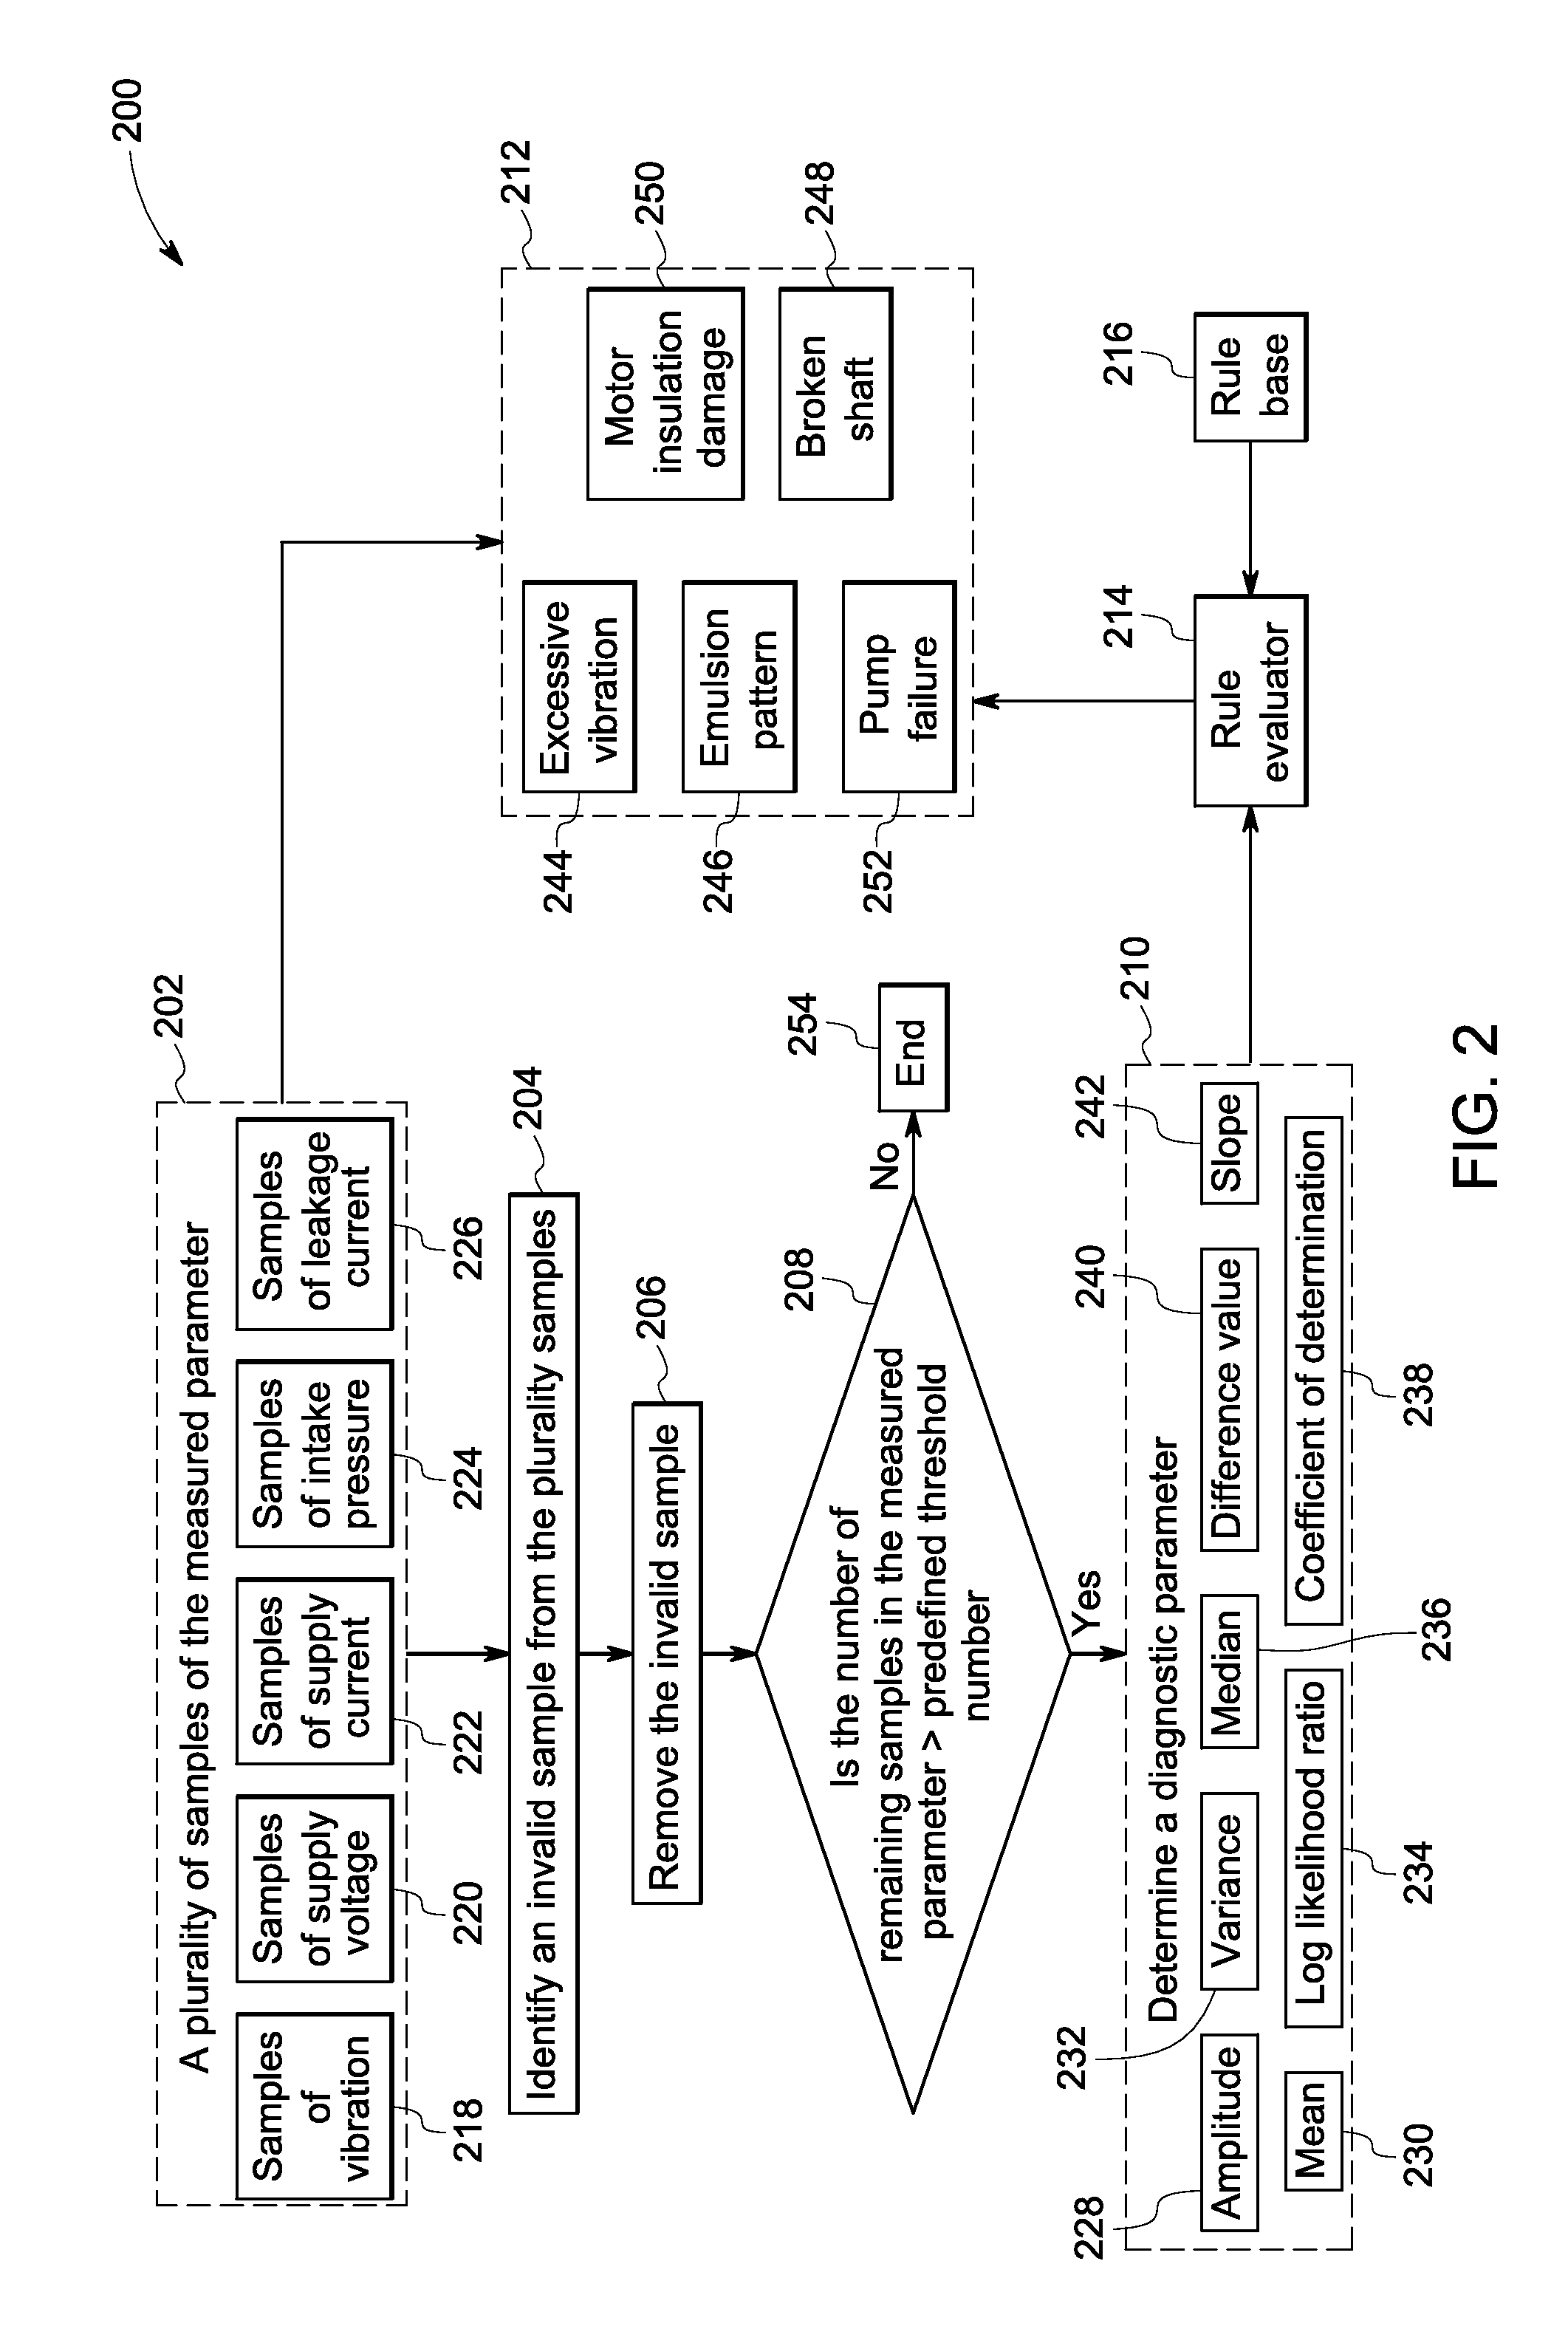 System and method for fault detection in an electrical device